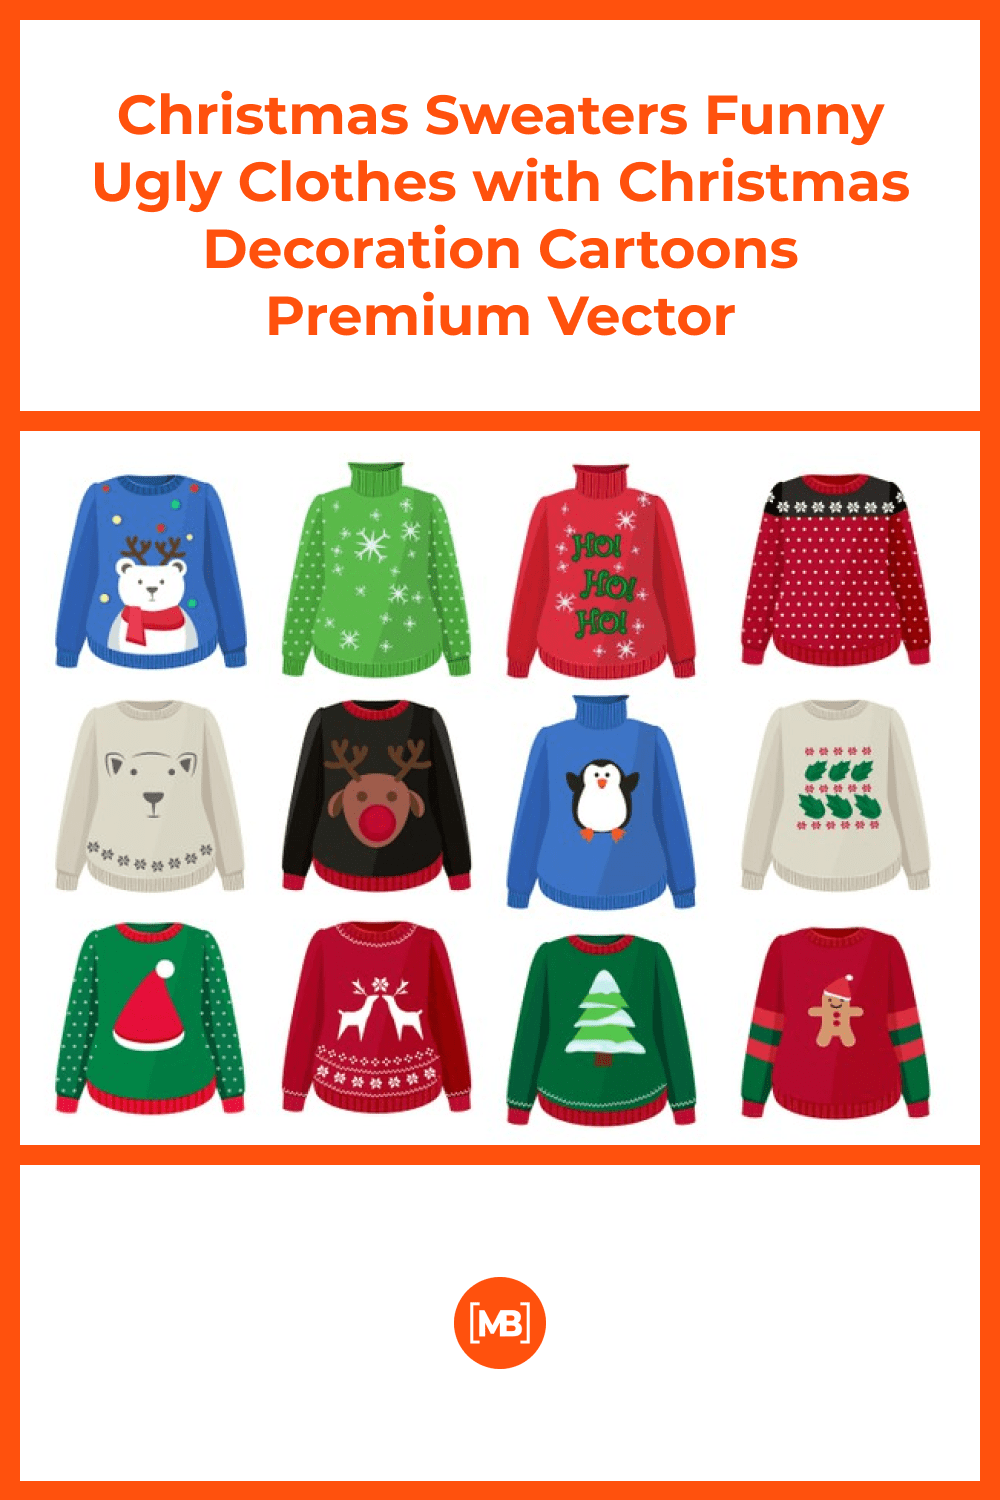 Christmas Sweaters Funny Ugly Clothes with Christmas Decoration Cartoons Premium.